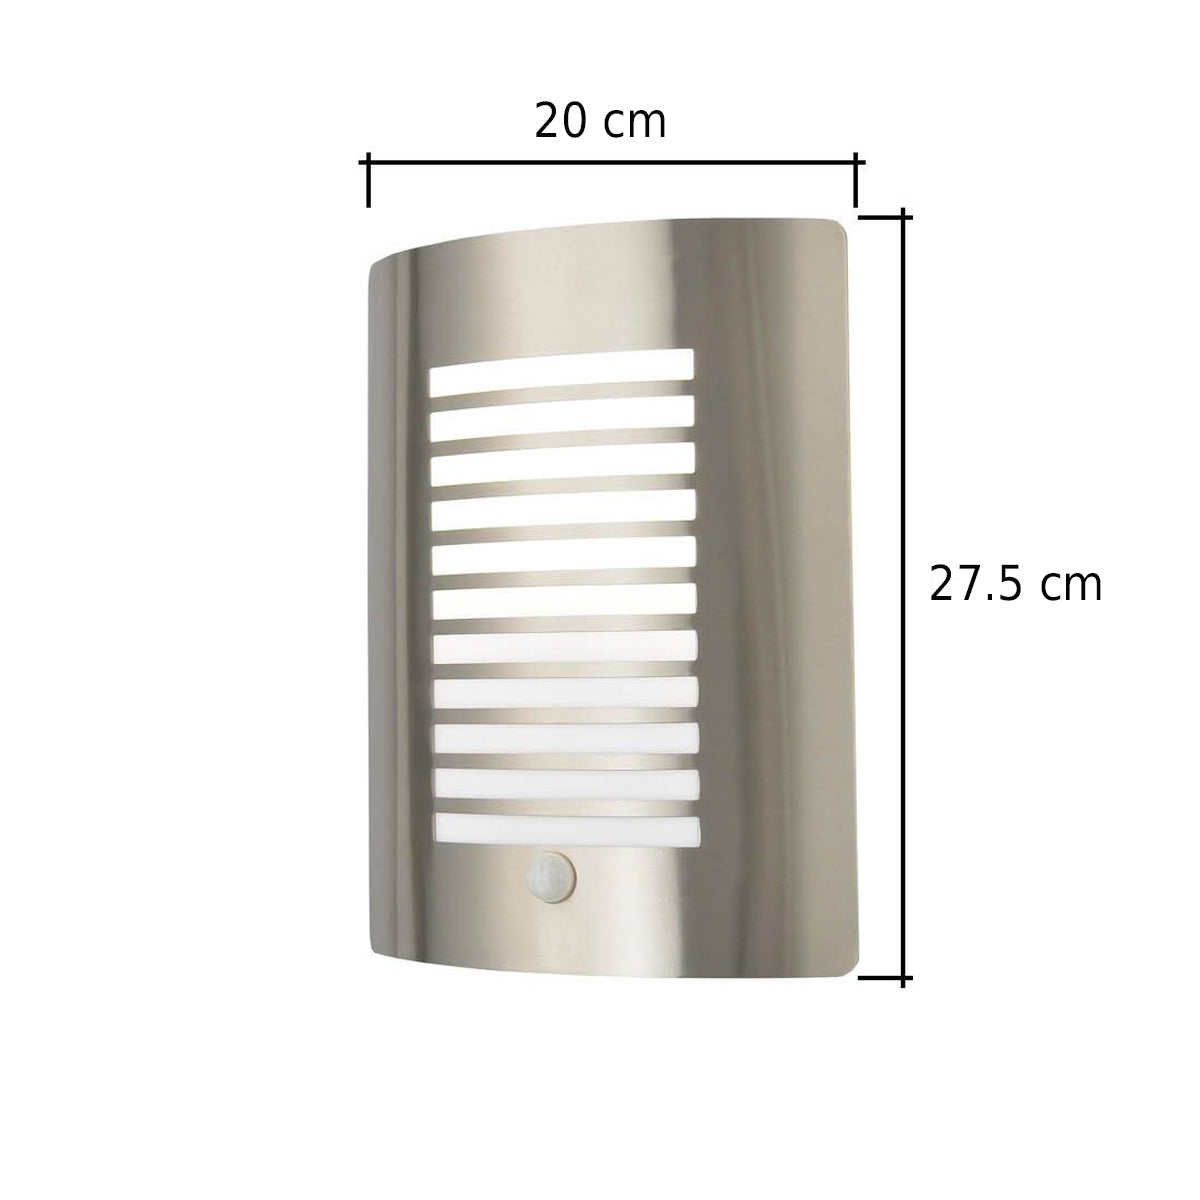 CGC MARA Silver Curved Outdoor Wall Light With Motion Sensor